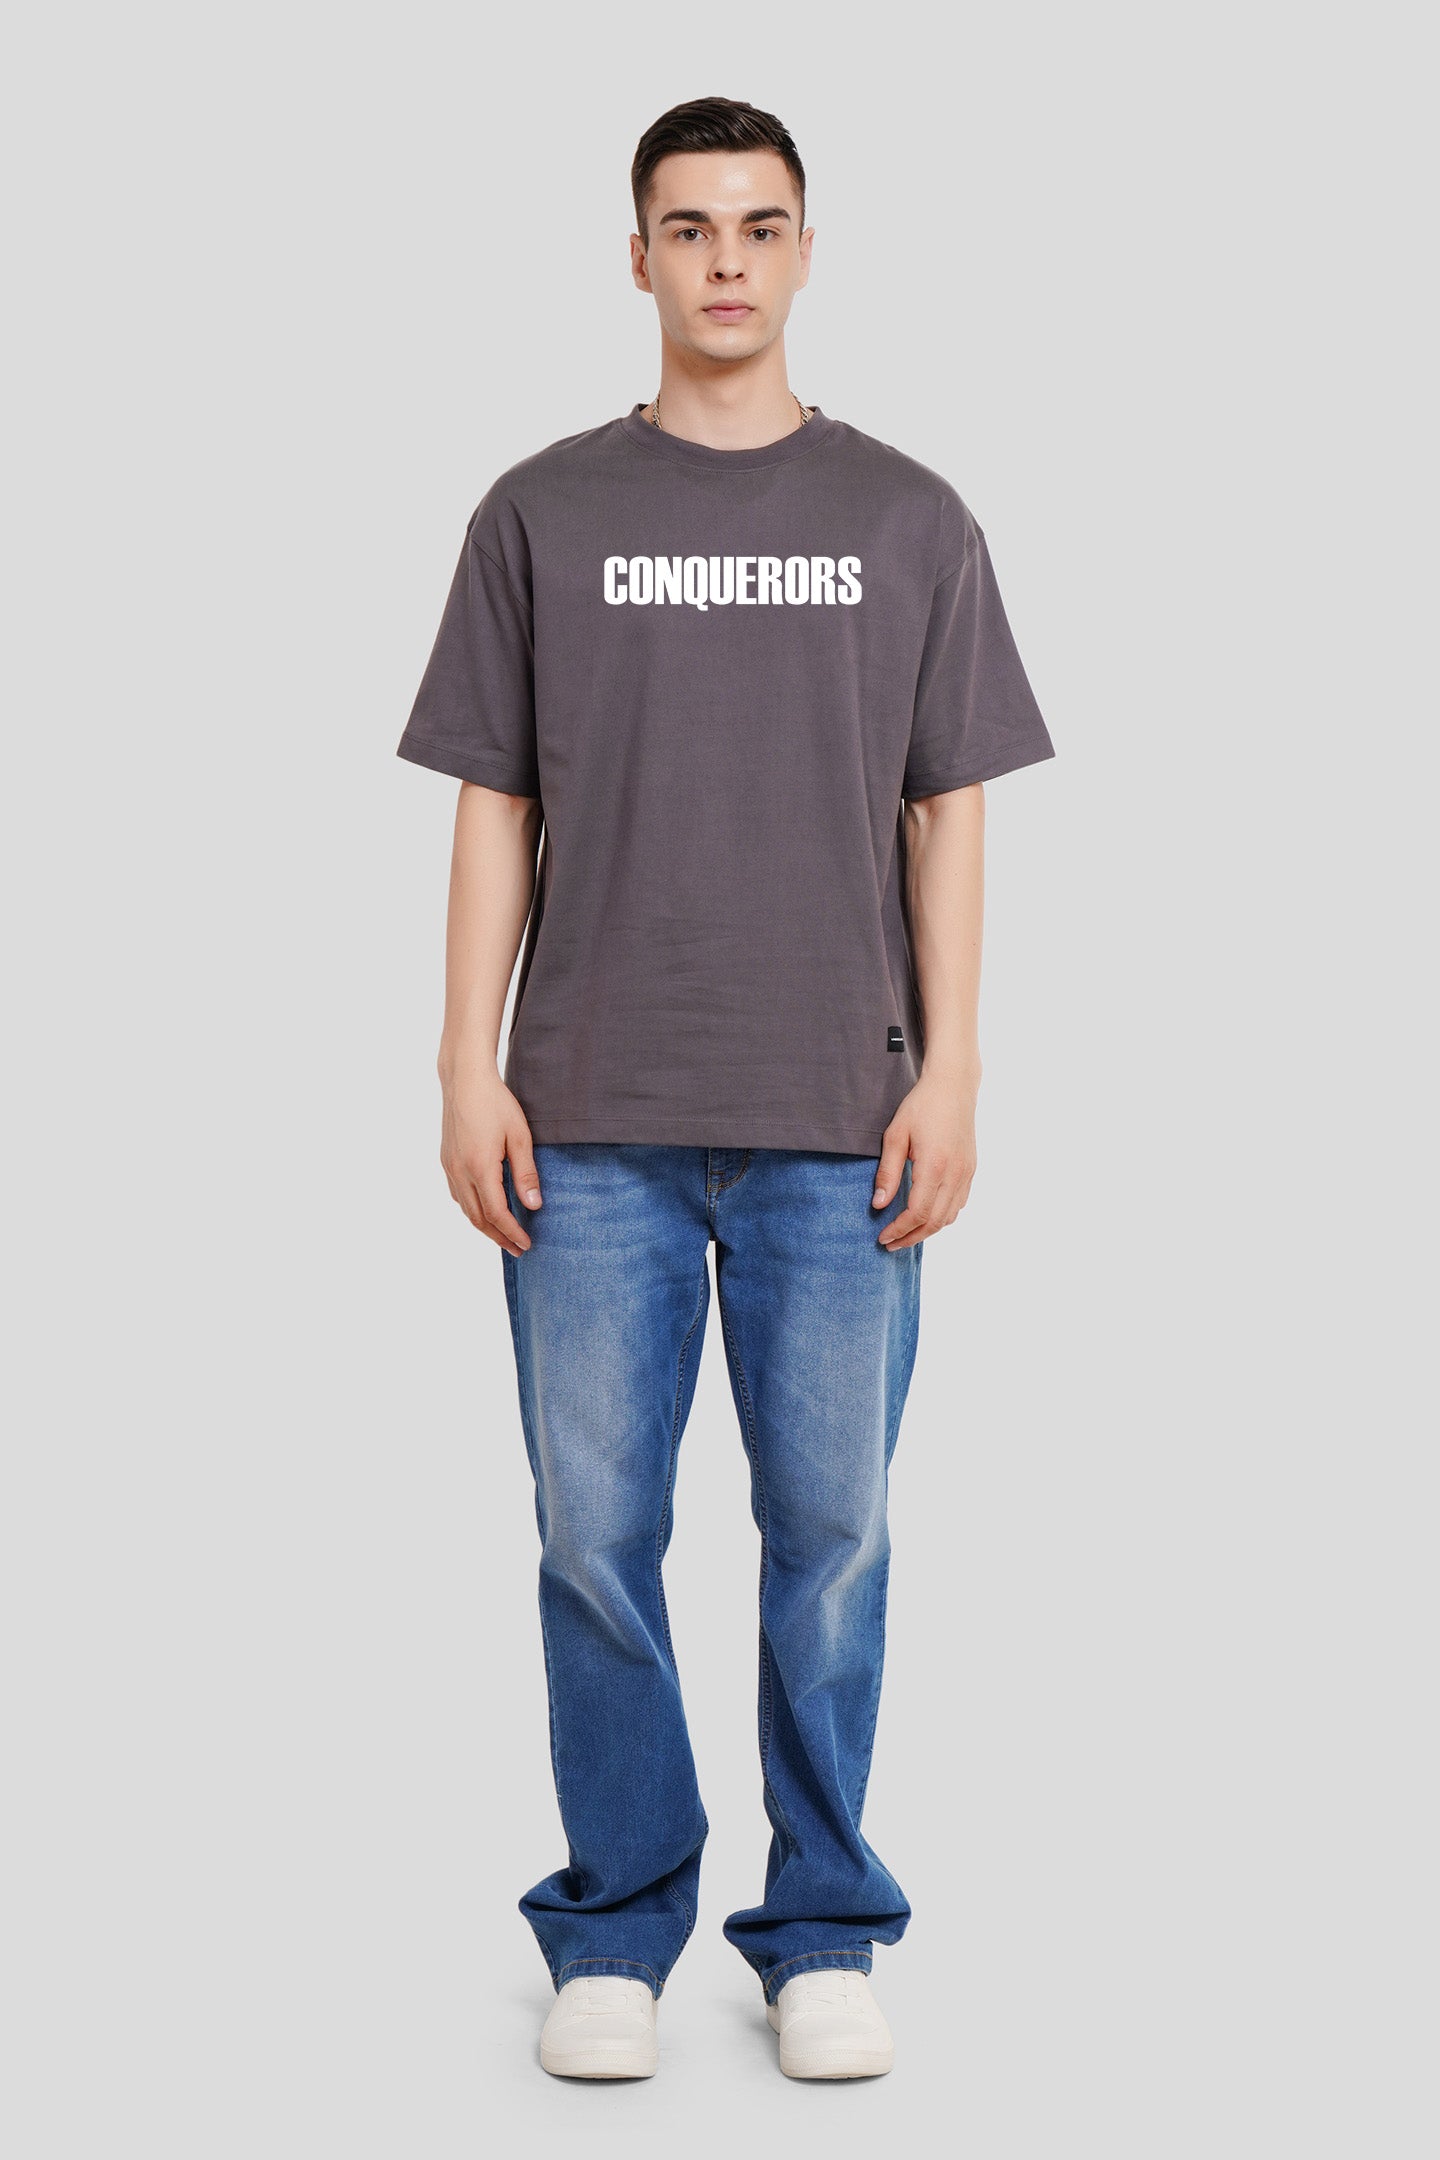 More Than Conquerors Dark Grey Printed T Shirt Men Oversized Fit With Front And Back Design Pic 4